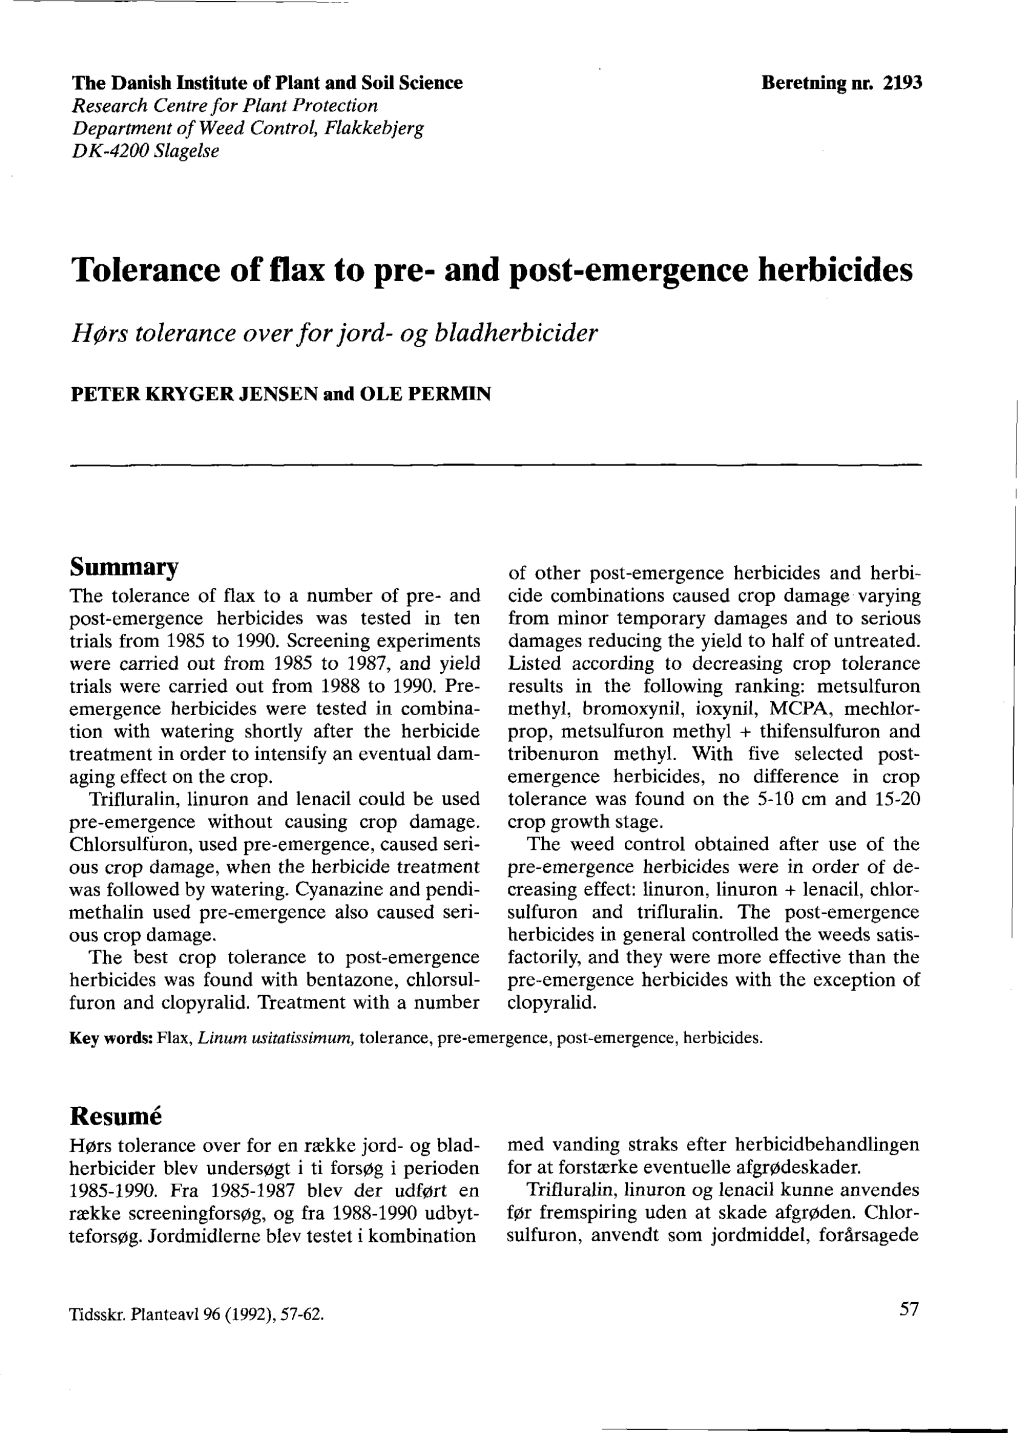 Tolerance of Flax to Pre- and Post-Emergence Herbicides